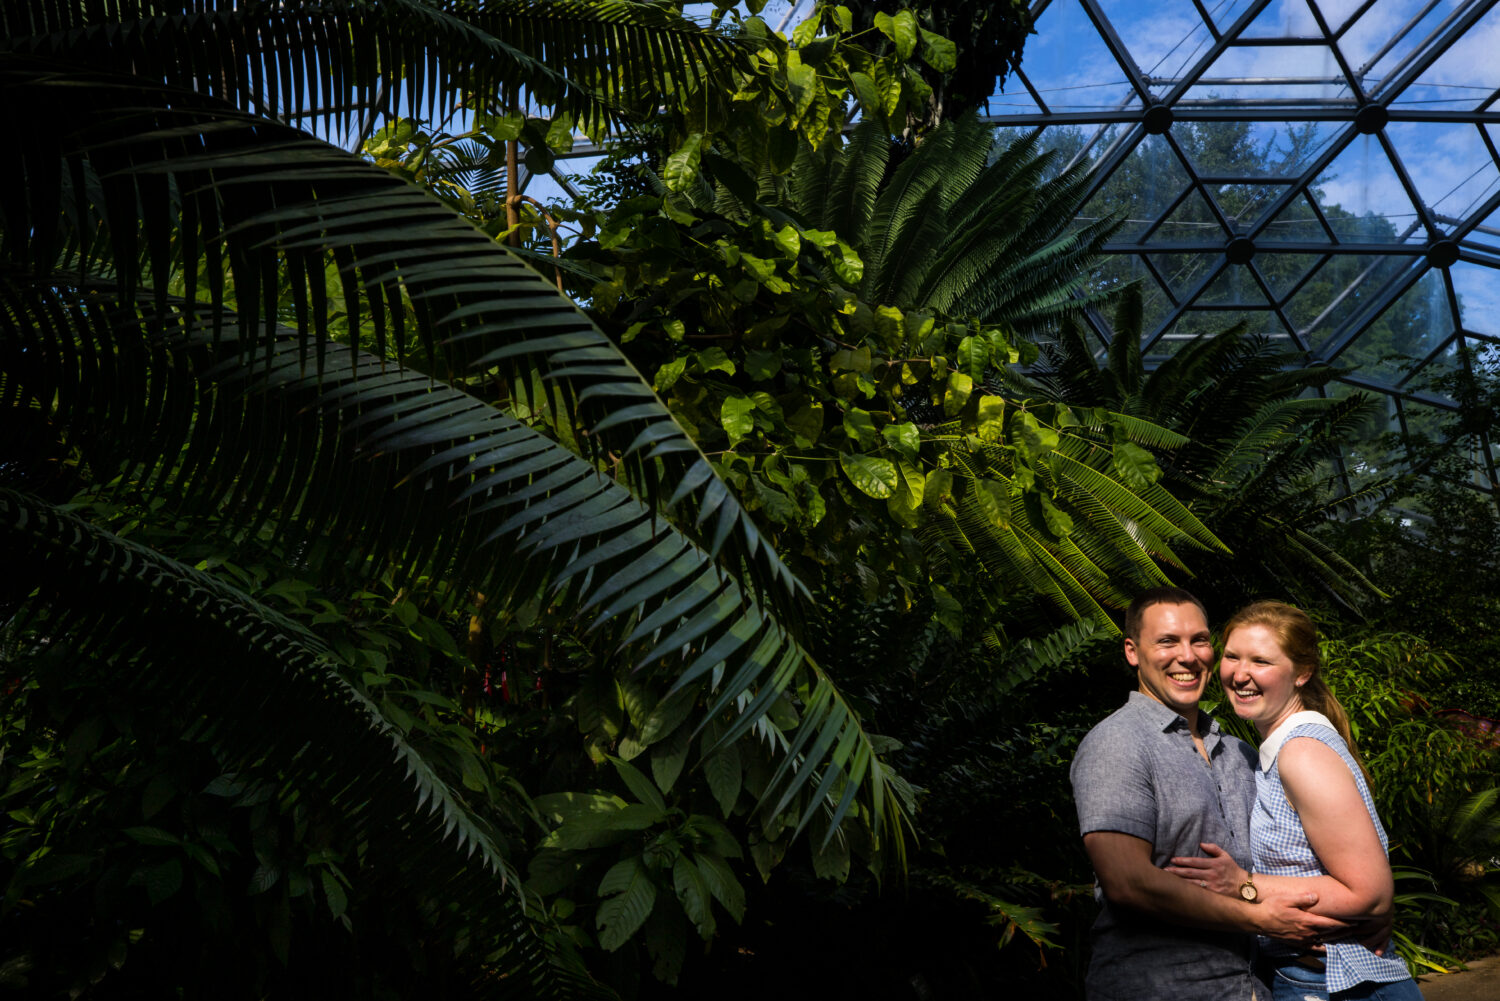 missouri botanical gardens proposal photographer, lisa rhinehart, captures this creative, vibrant, fun, unique image of the couple as they embrace one another and are laughing and smiling amongst the various plants inside the garden